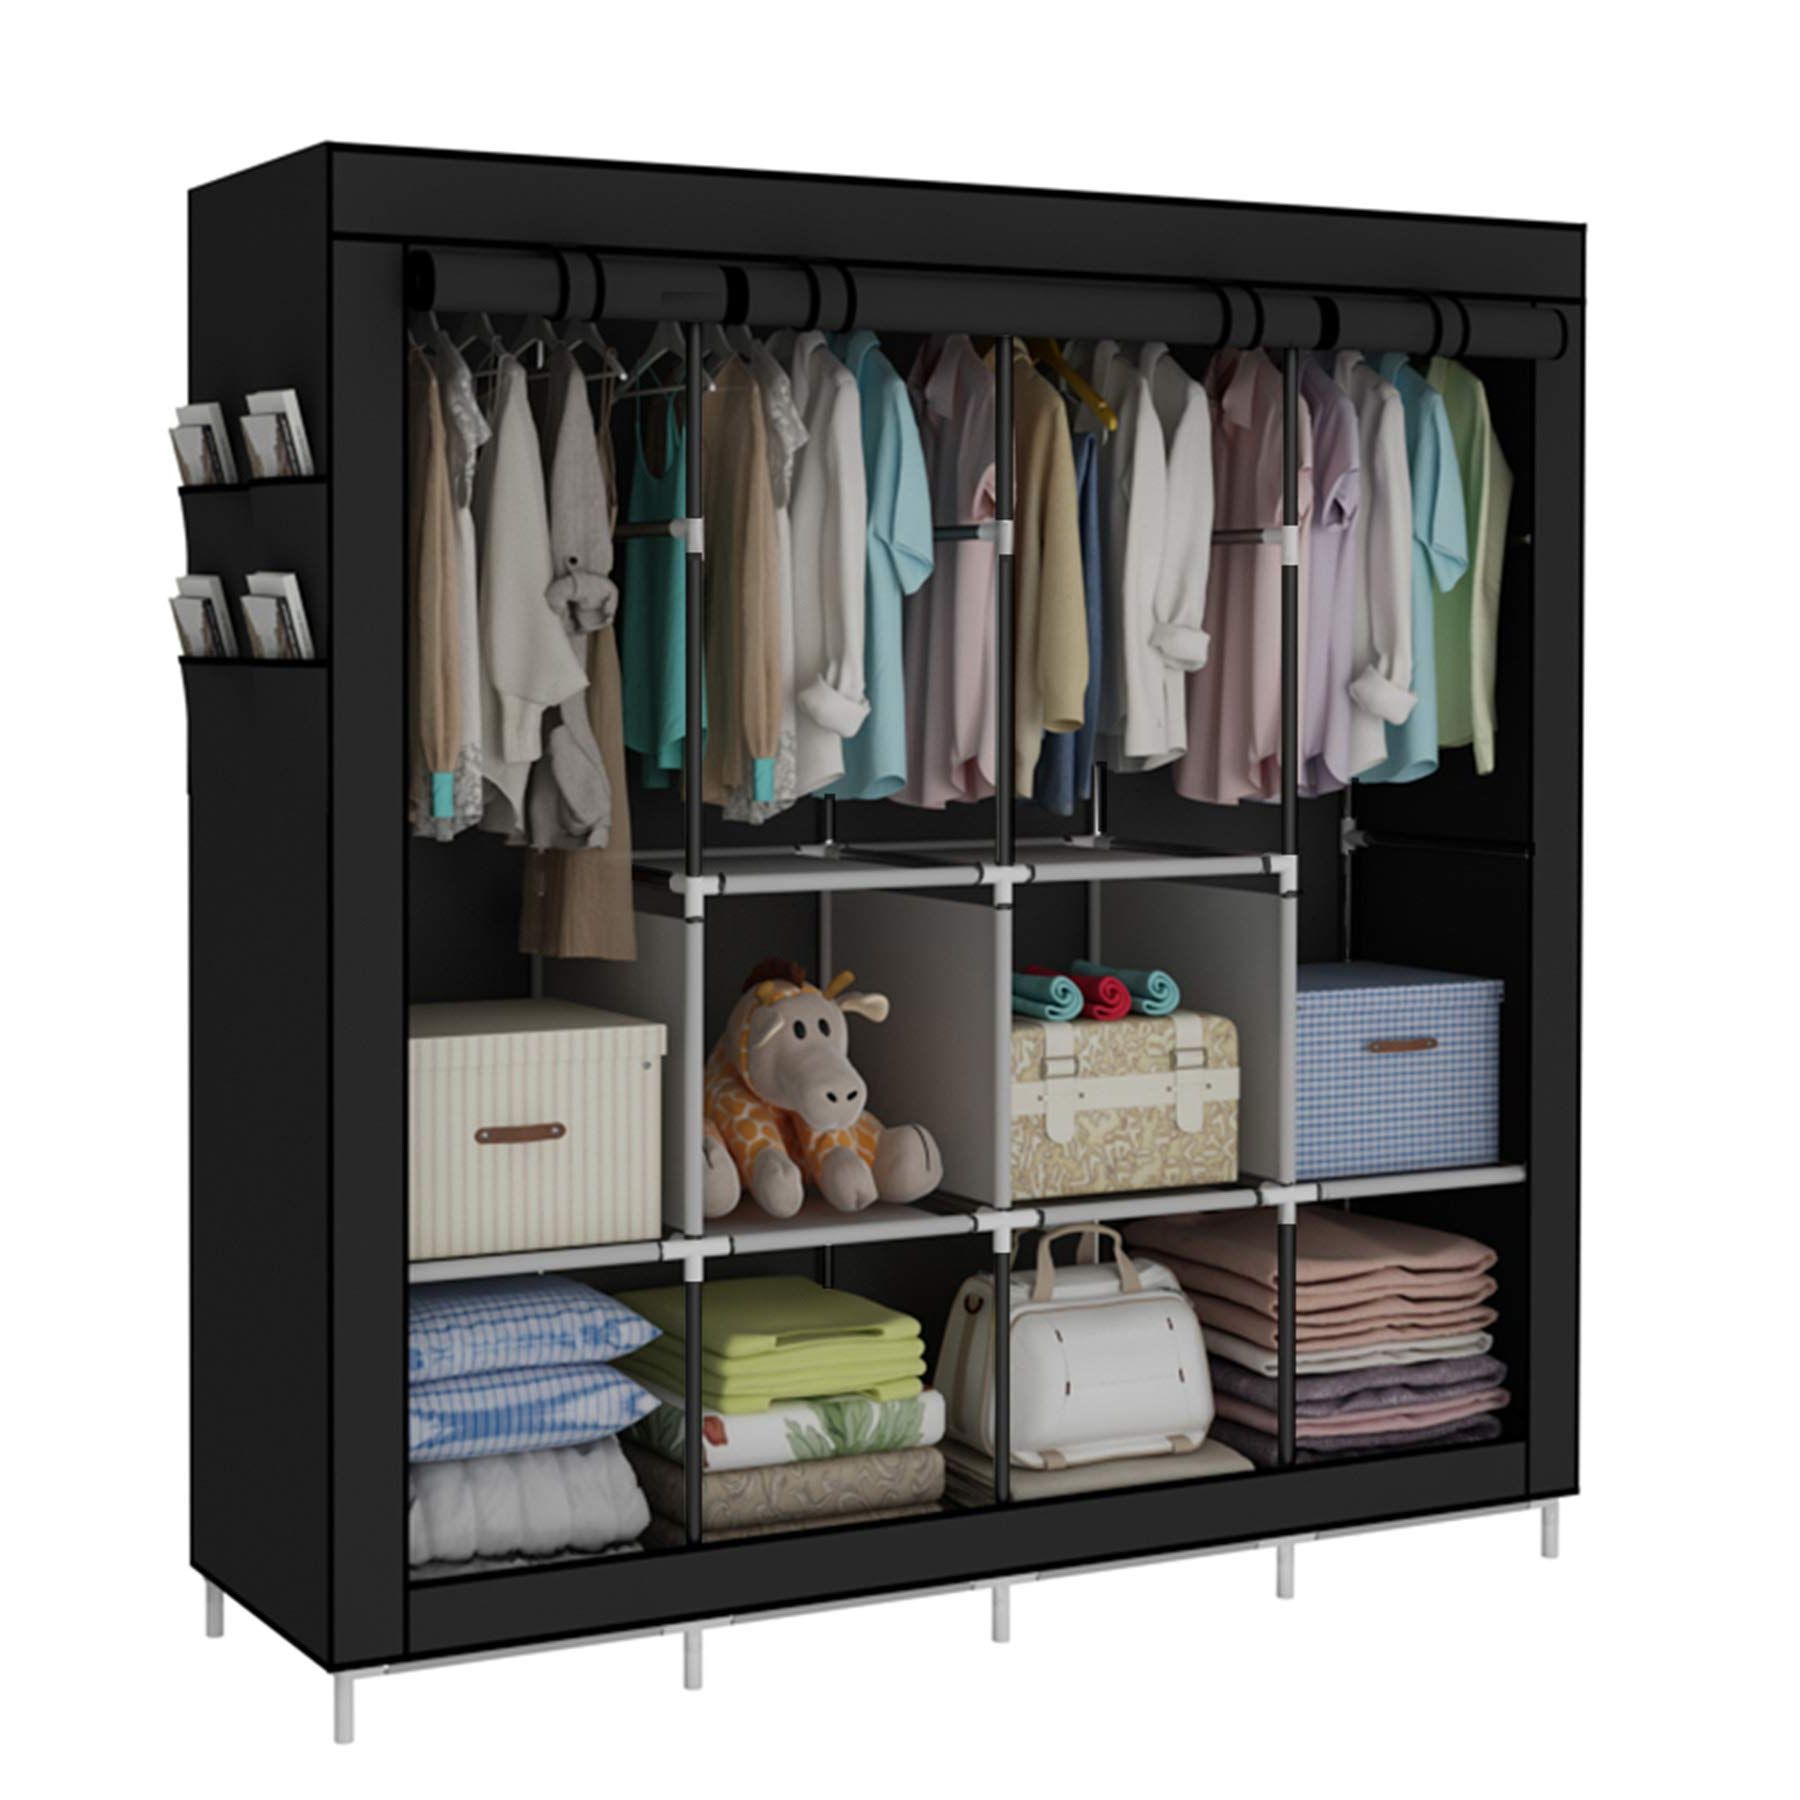 Wardrobes With Shelf Portable Closet For Current Amazon: Accstore Portable Wardrobe Clothing Wardrobe Shelves Clothes  Storage Organiser With 4 Hanging Rail,black : Home & Kitchen (Photo 3 of 10)